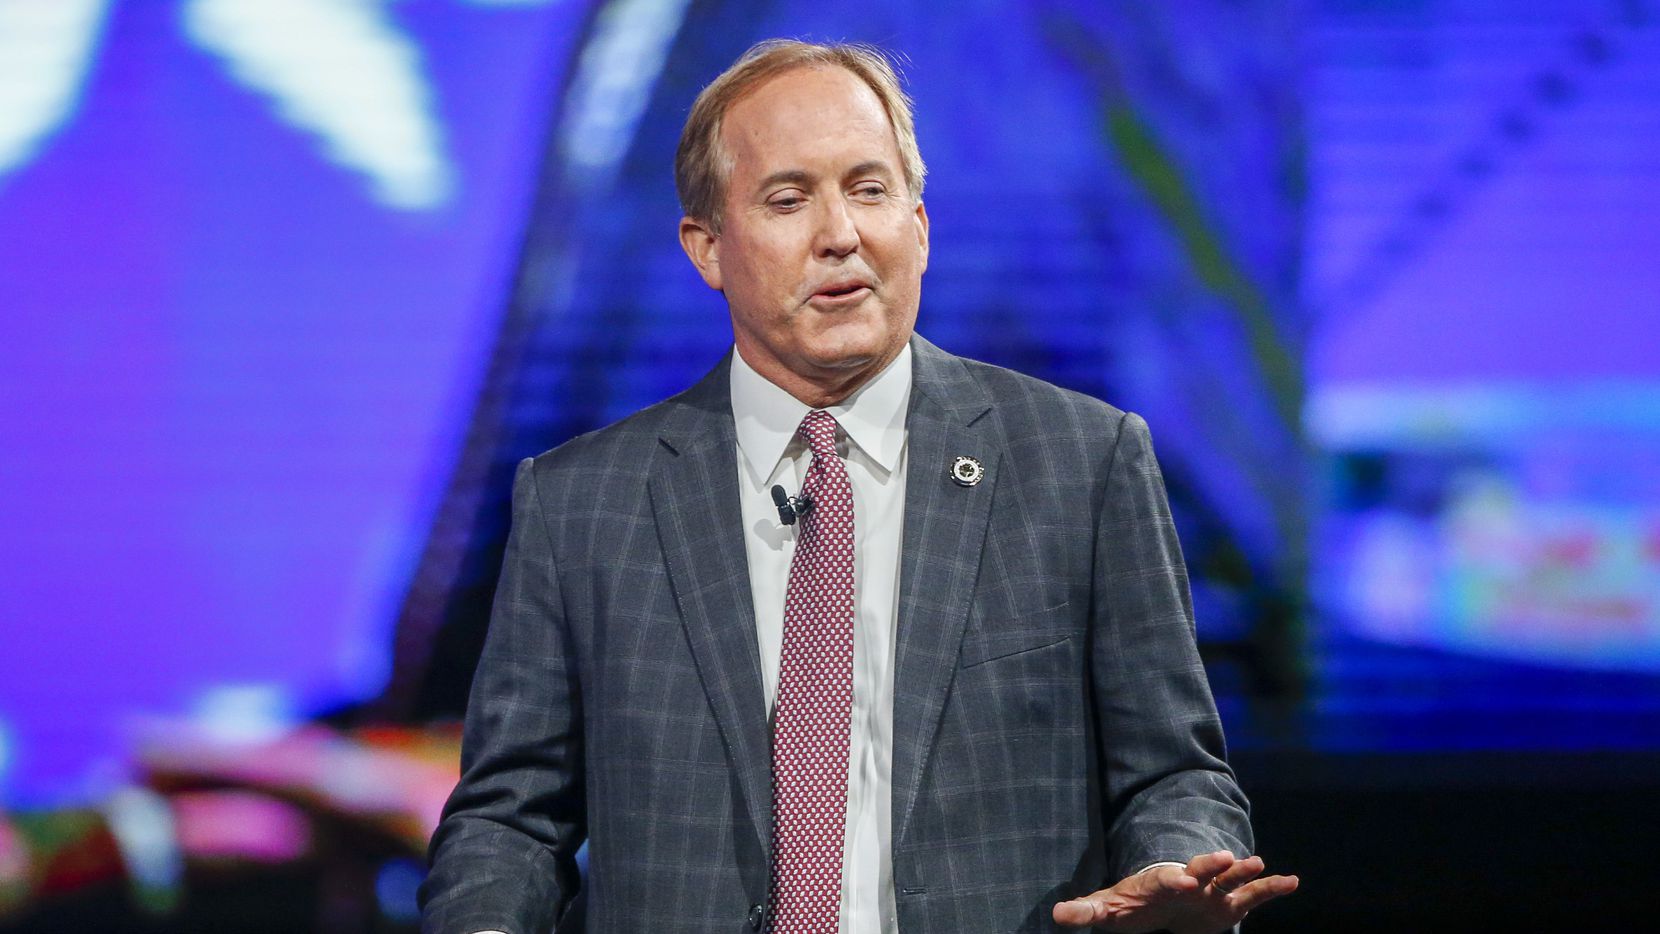 Texas Attorney General Ken Paxton gives remarks at the Conservative Political Action Conference on Sunday, July 11, 2021, in Dallas. (Elias Valverde II/The Dallas Morning News)